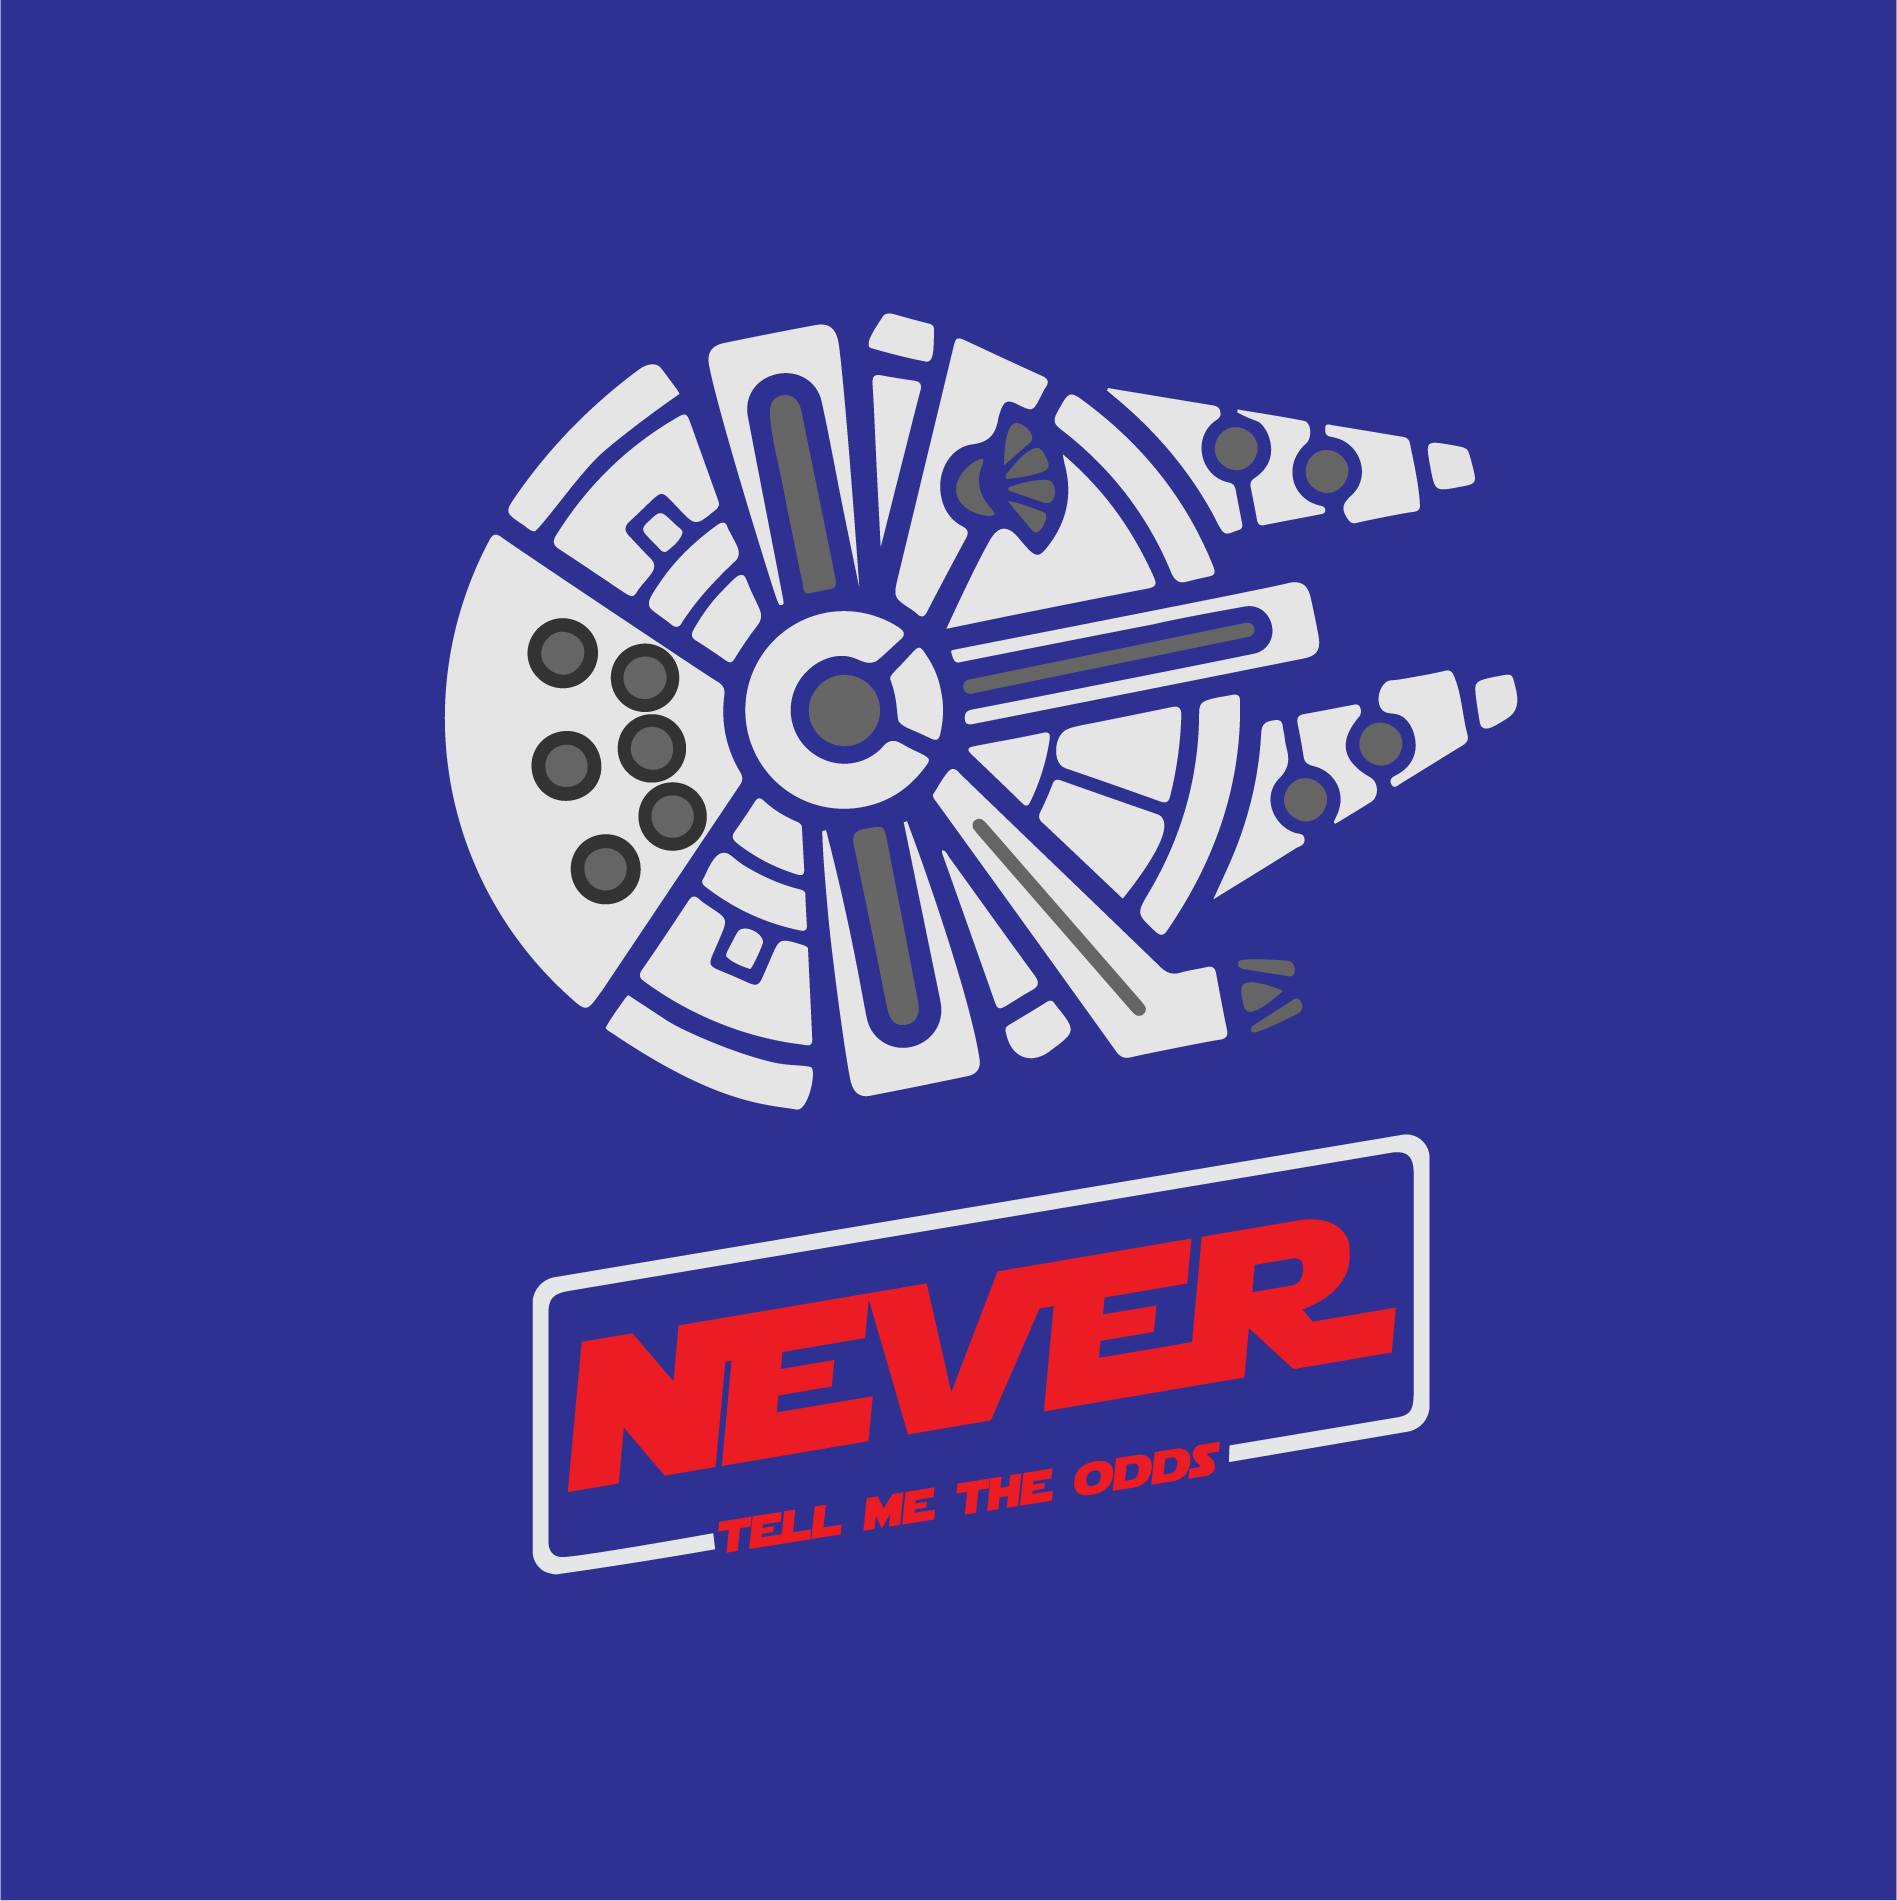 Download Millennium Falcon Star Wars Svg Dxf Eps Png Cut File Cricut And Si Paper Pi SVG, PNG, EPS, DXF File